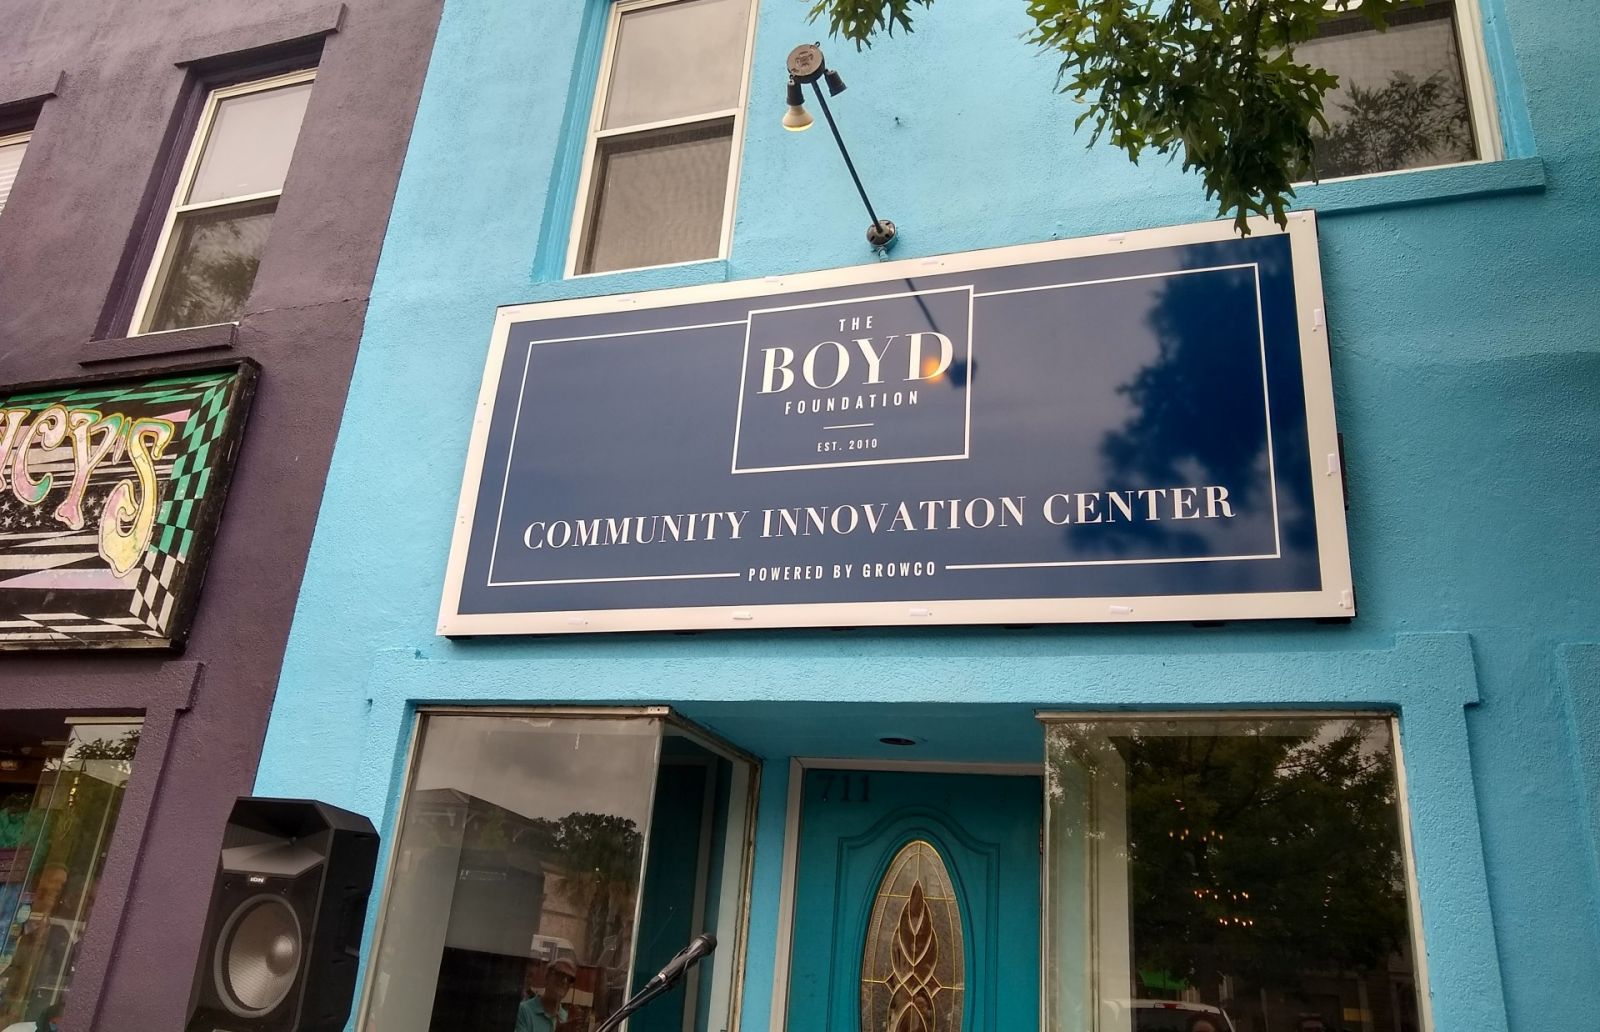 The Boyd Foundation Community Innovation Center at 711 Saluda Ave. in Five Points aims to lure high-tech startups to Columbia. (Photo/Christina Lee Knauss)